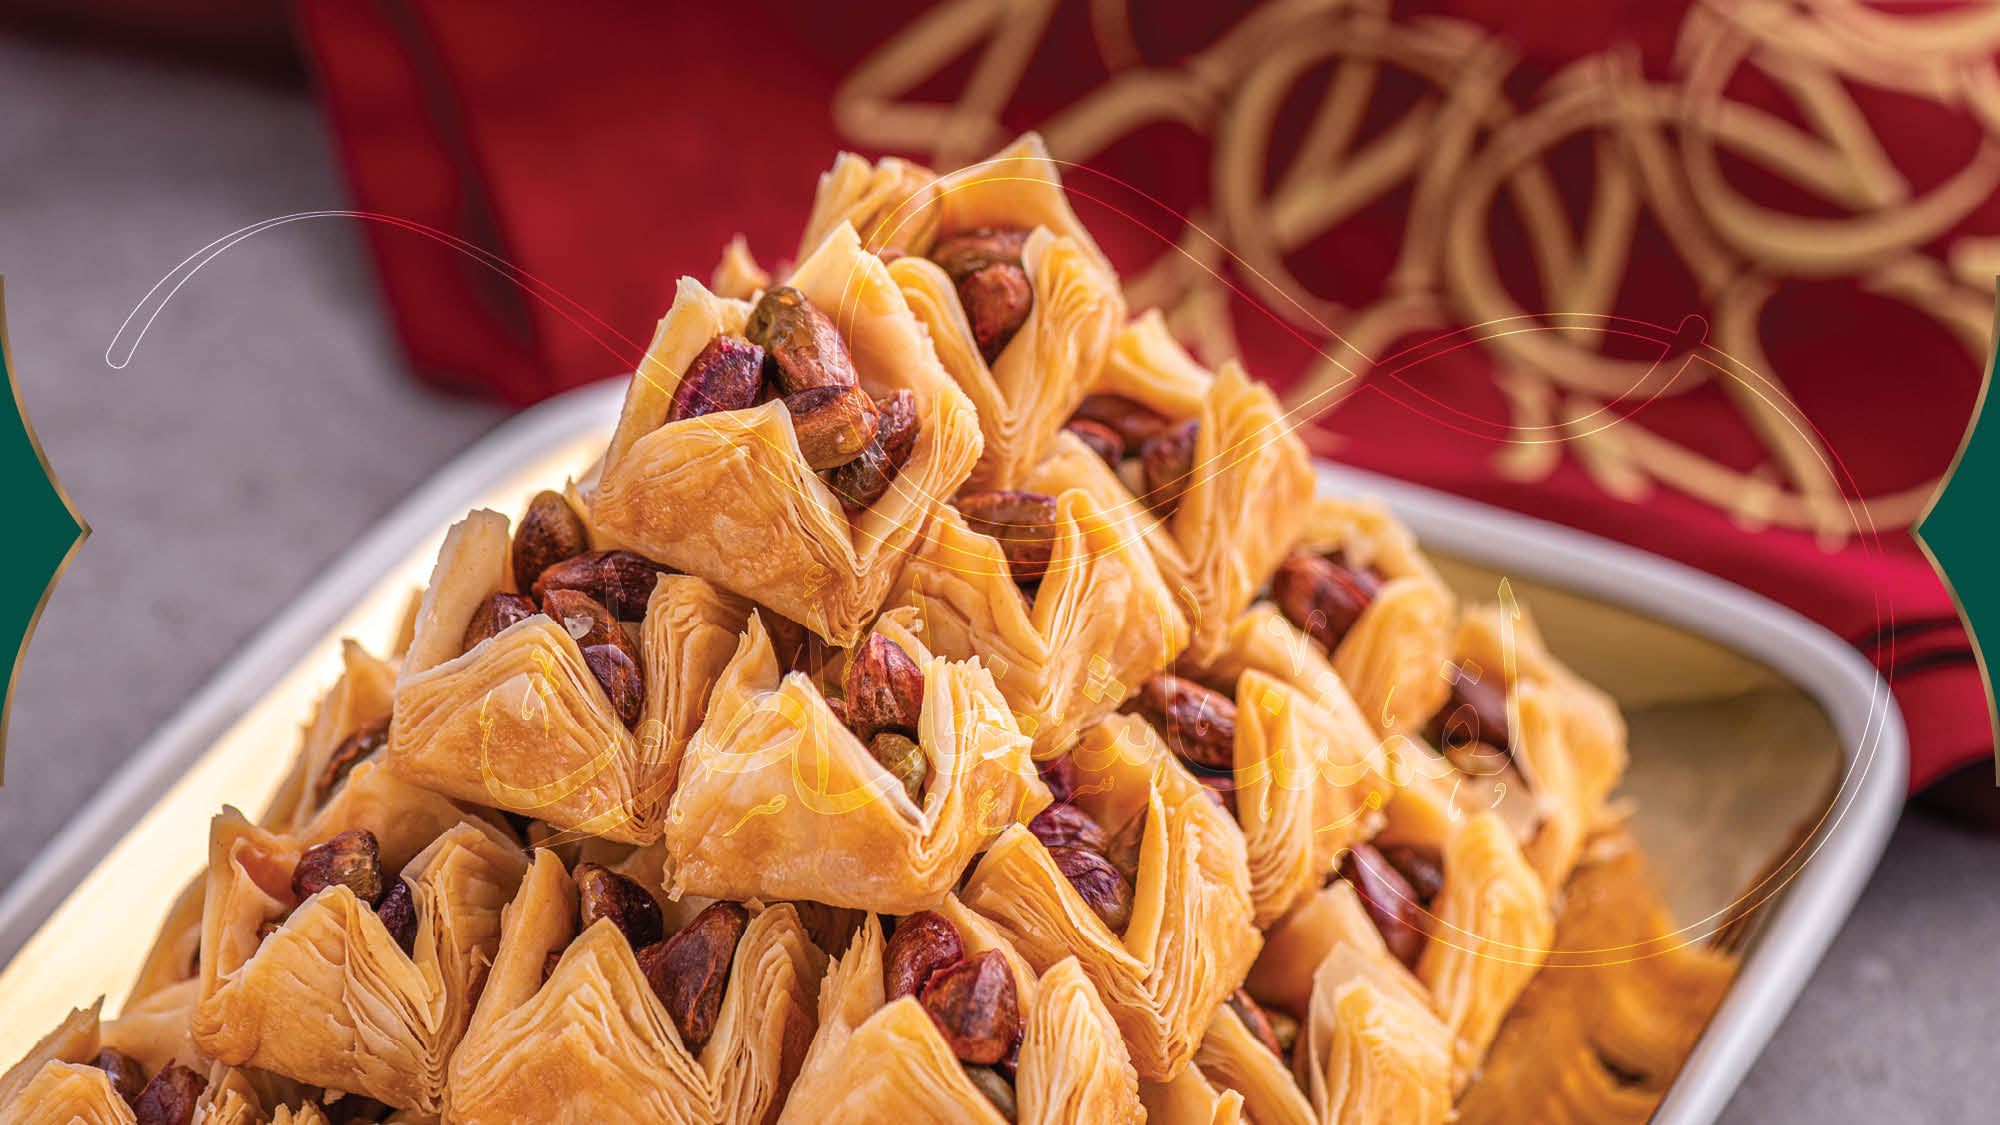 Discover Your Favorite: Get the Best Arabic Dessert for You